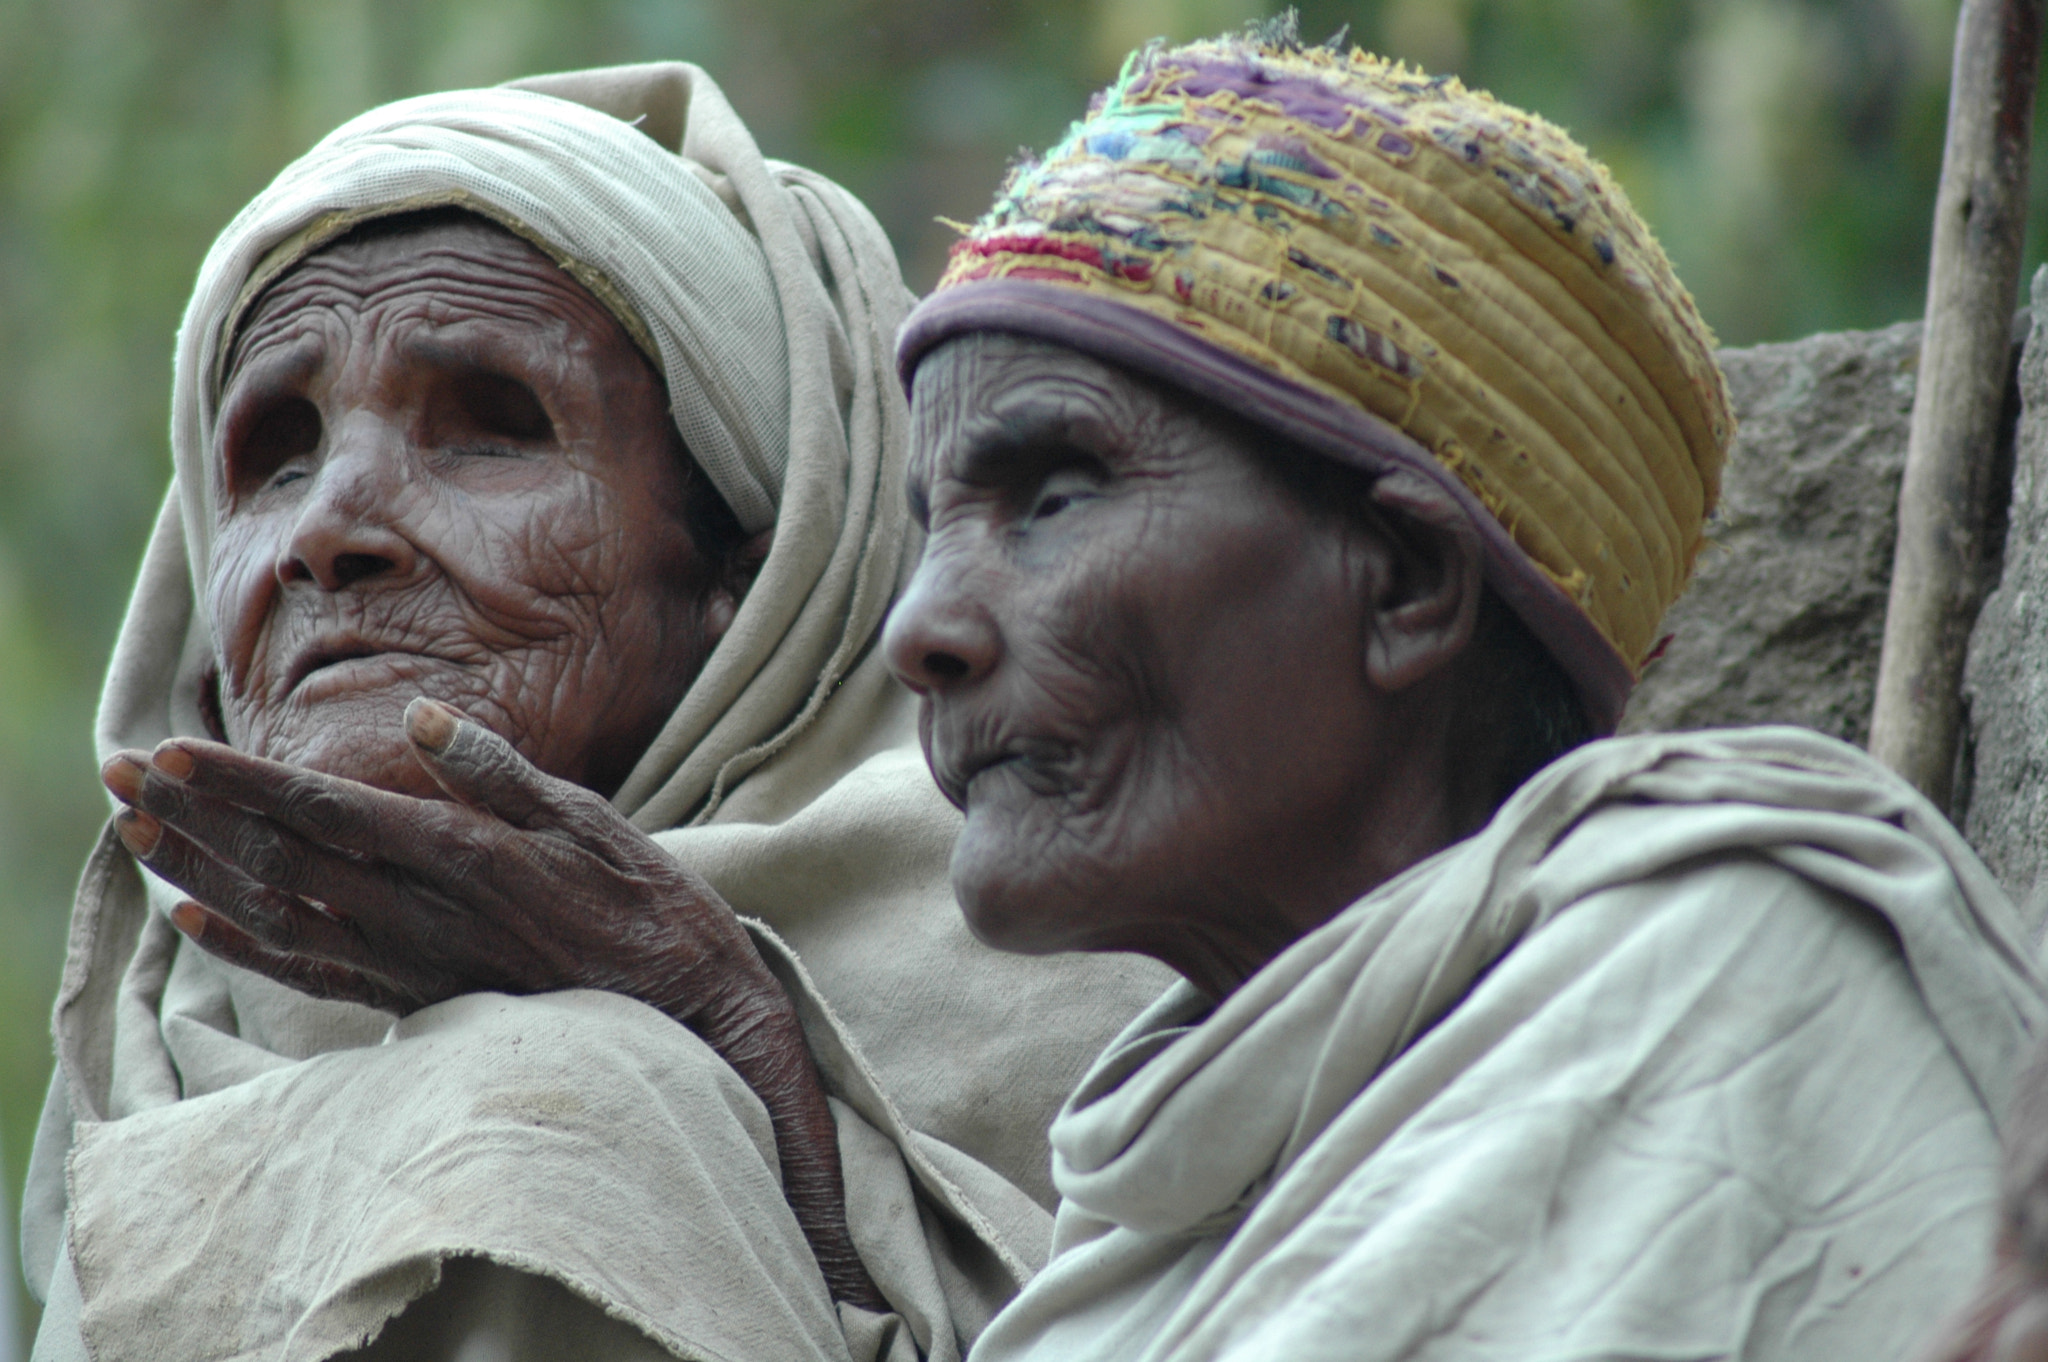 Tamron AF 70-300mm F4-5.6 Di LD Macro sample photo. Ethiopia, old women, begging, hungry, searching for kindness, pilgrims photography